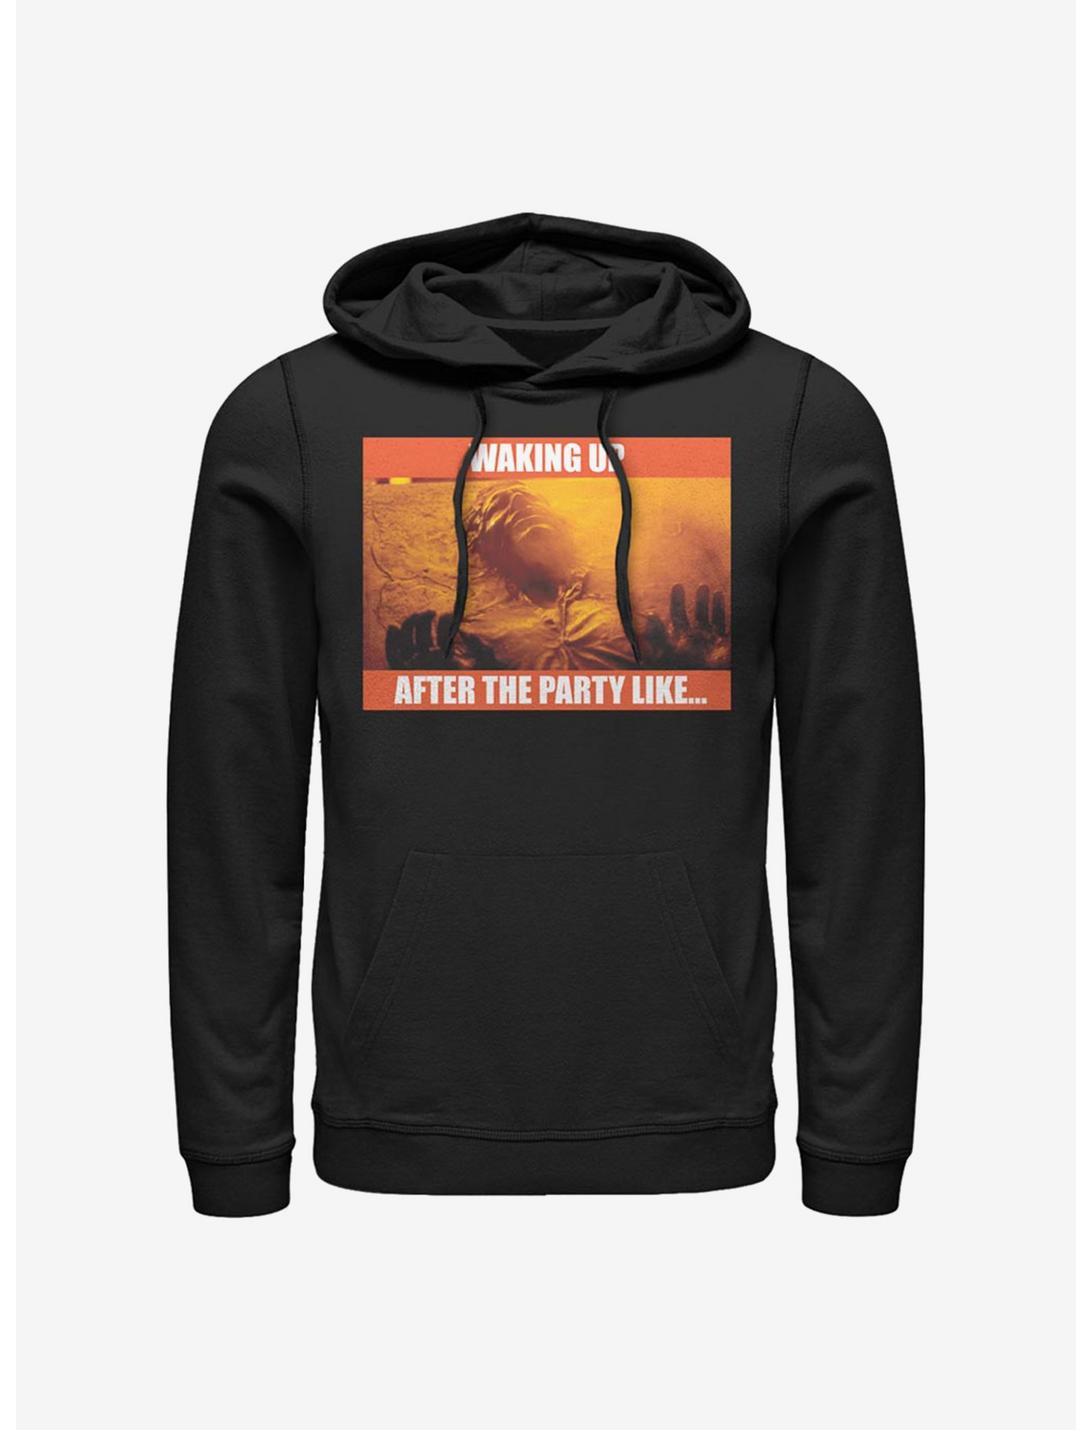 Star Wars Waking Up After The Party Hoodie, BLACK, hi-res